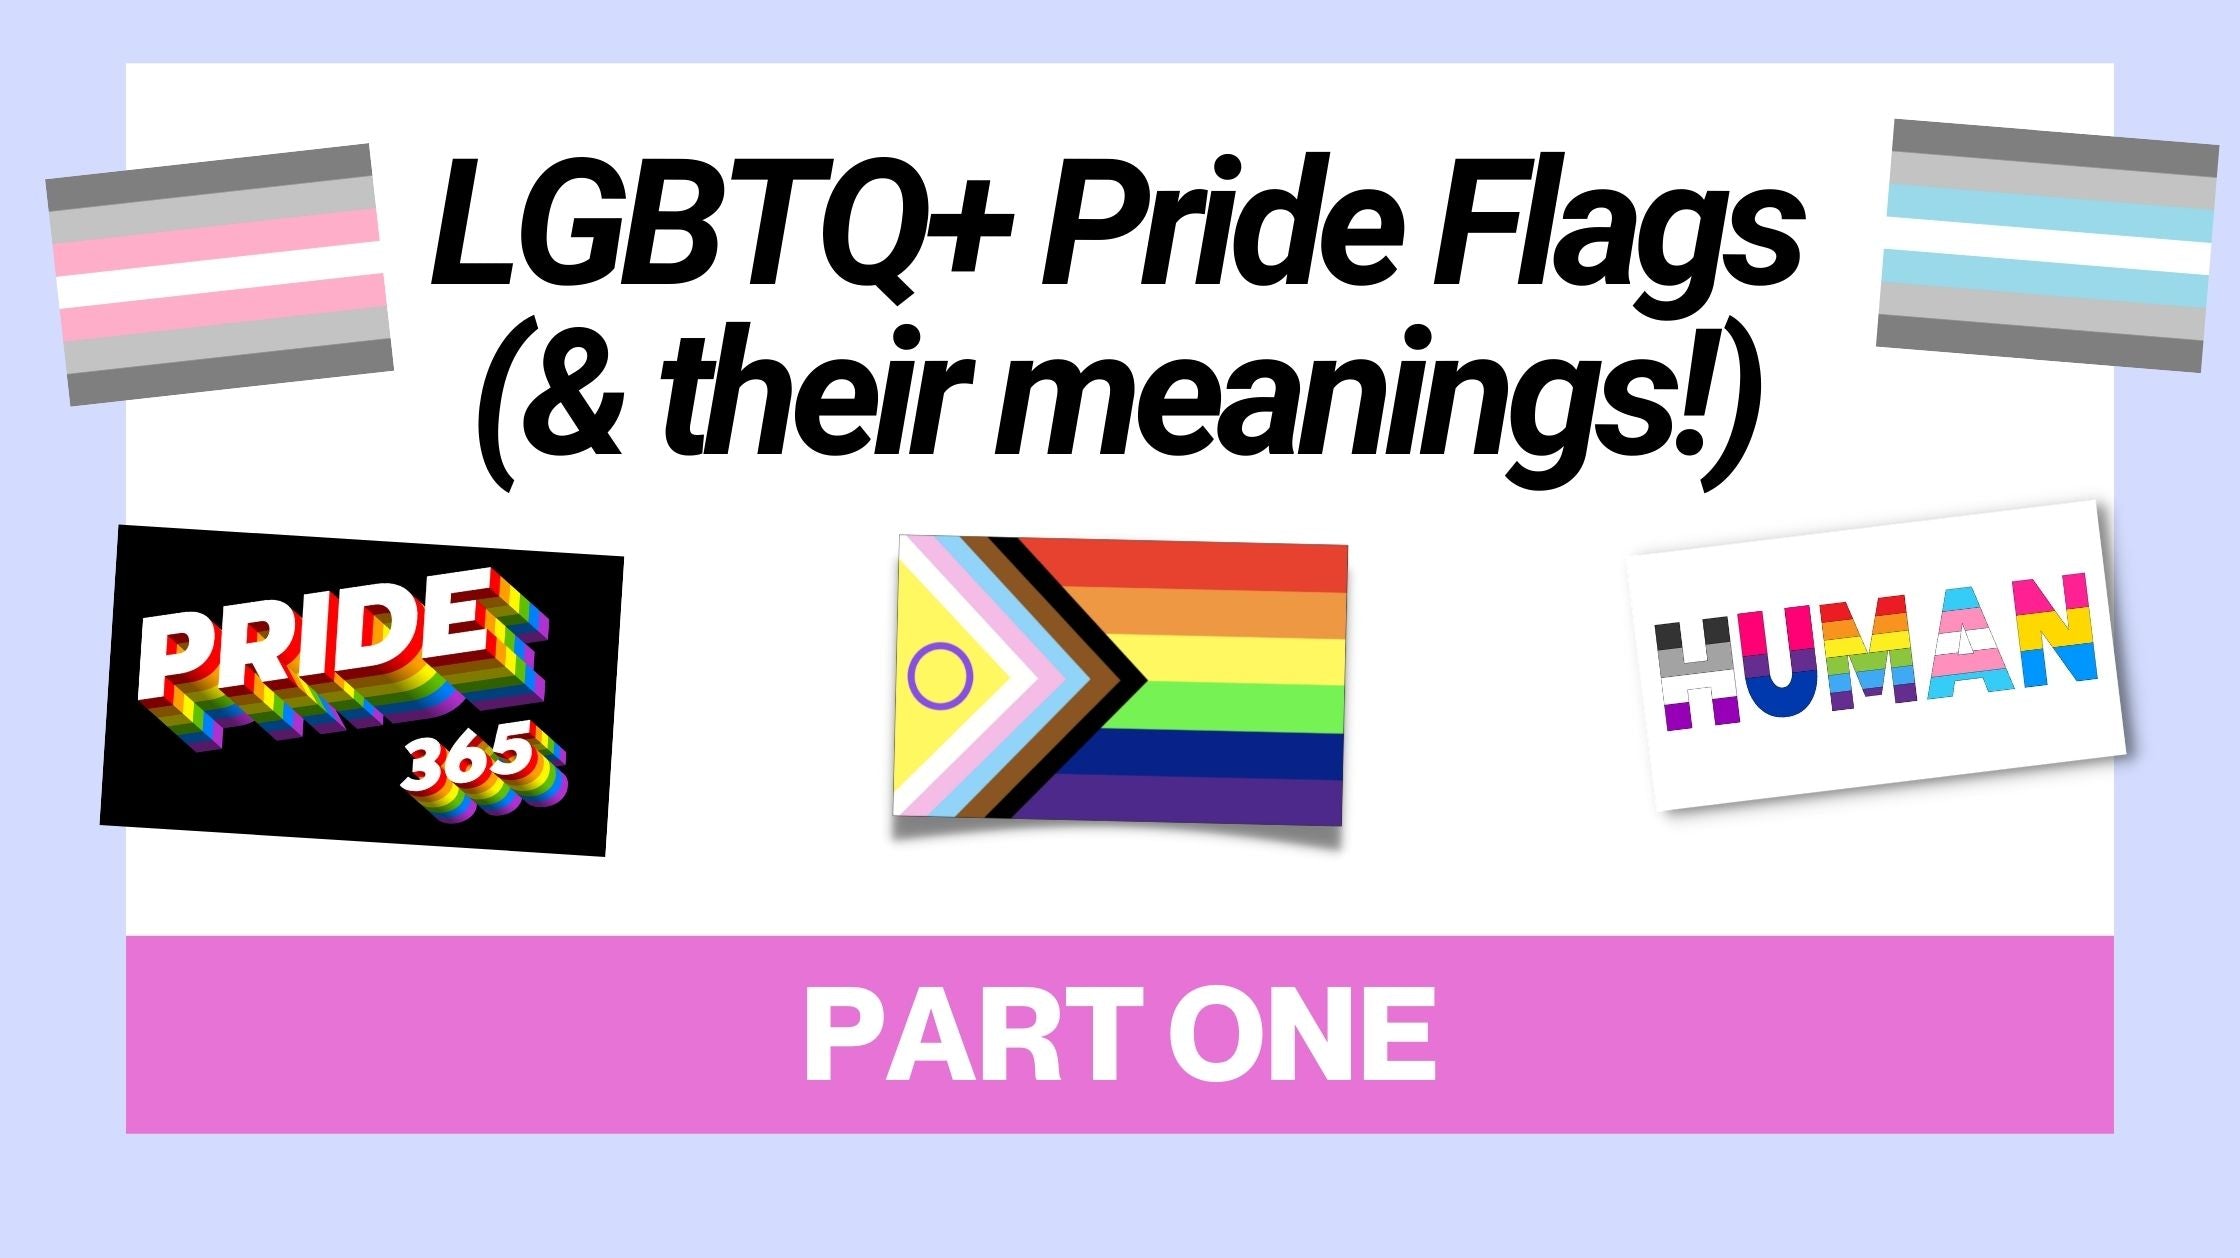 LGBTQ+ Pride Flags & Their Meanings